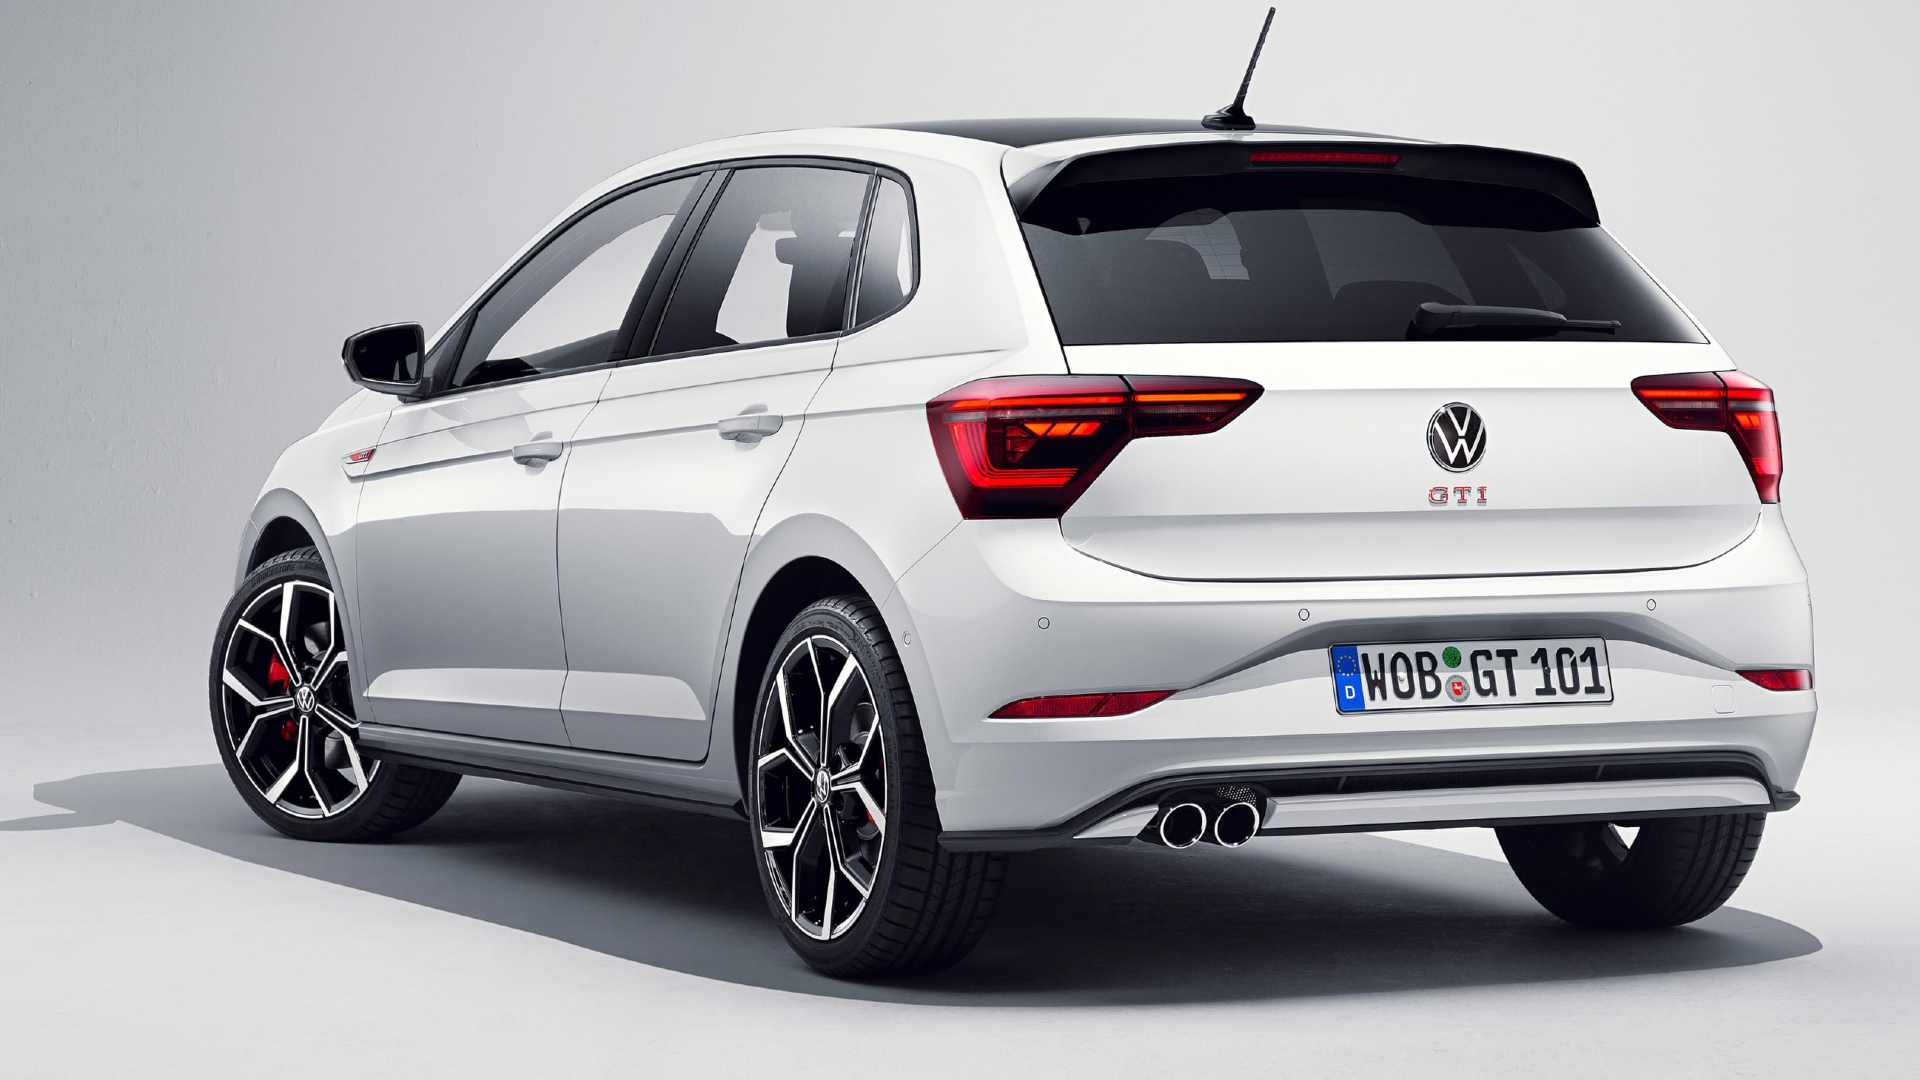 Volkswagen has been contemplating launching the current-gen Polo GTI in India for a while now. Image: Volkswagen